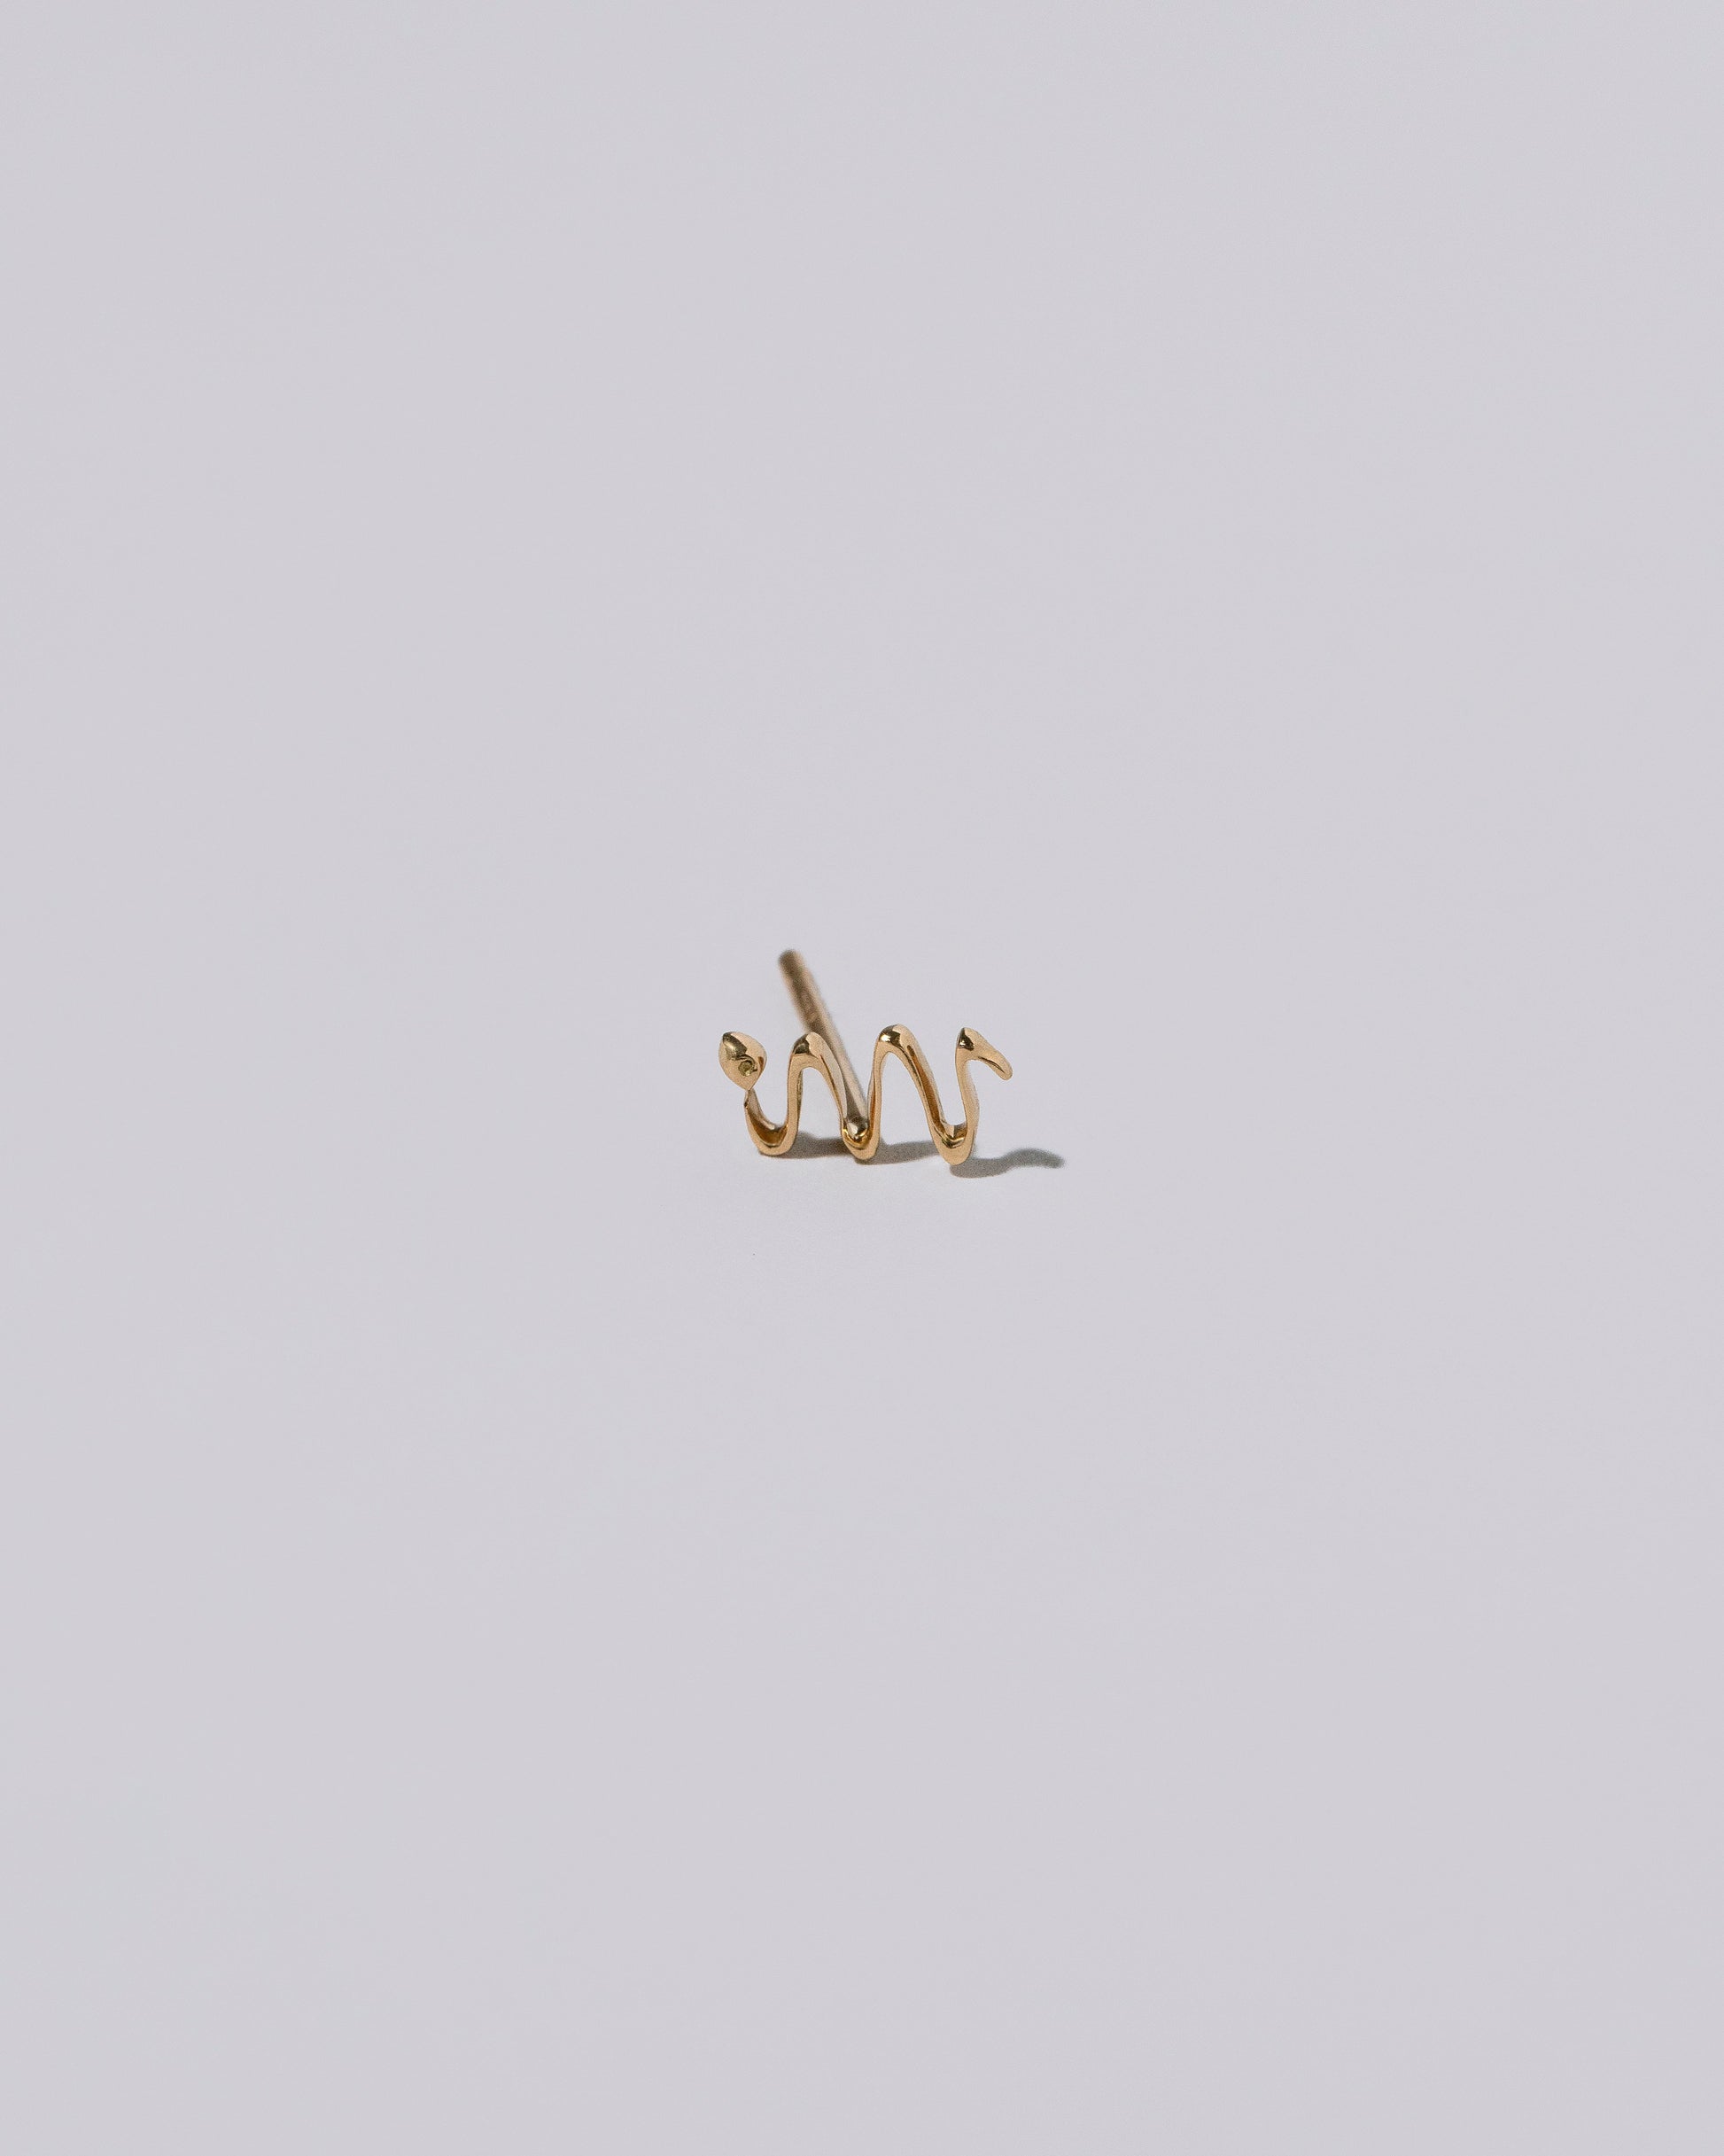 Product photo of Snake Stud Earring on light color background.